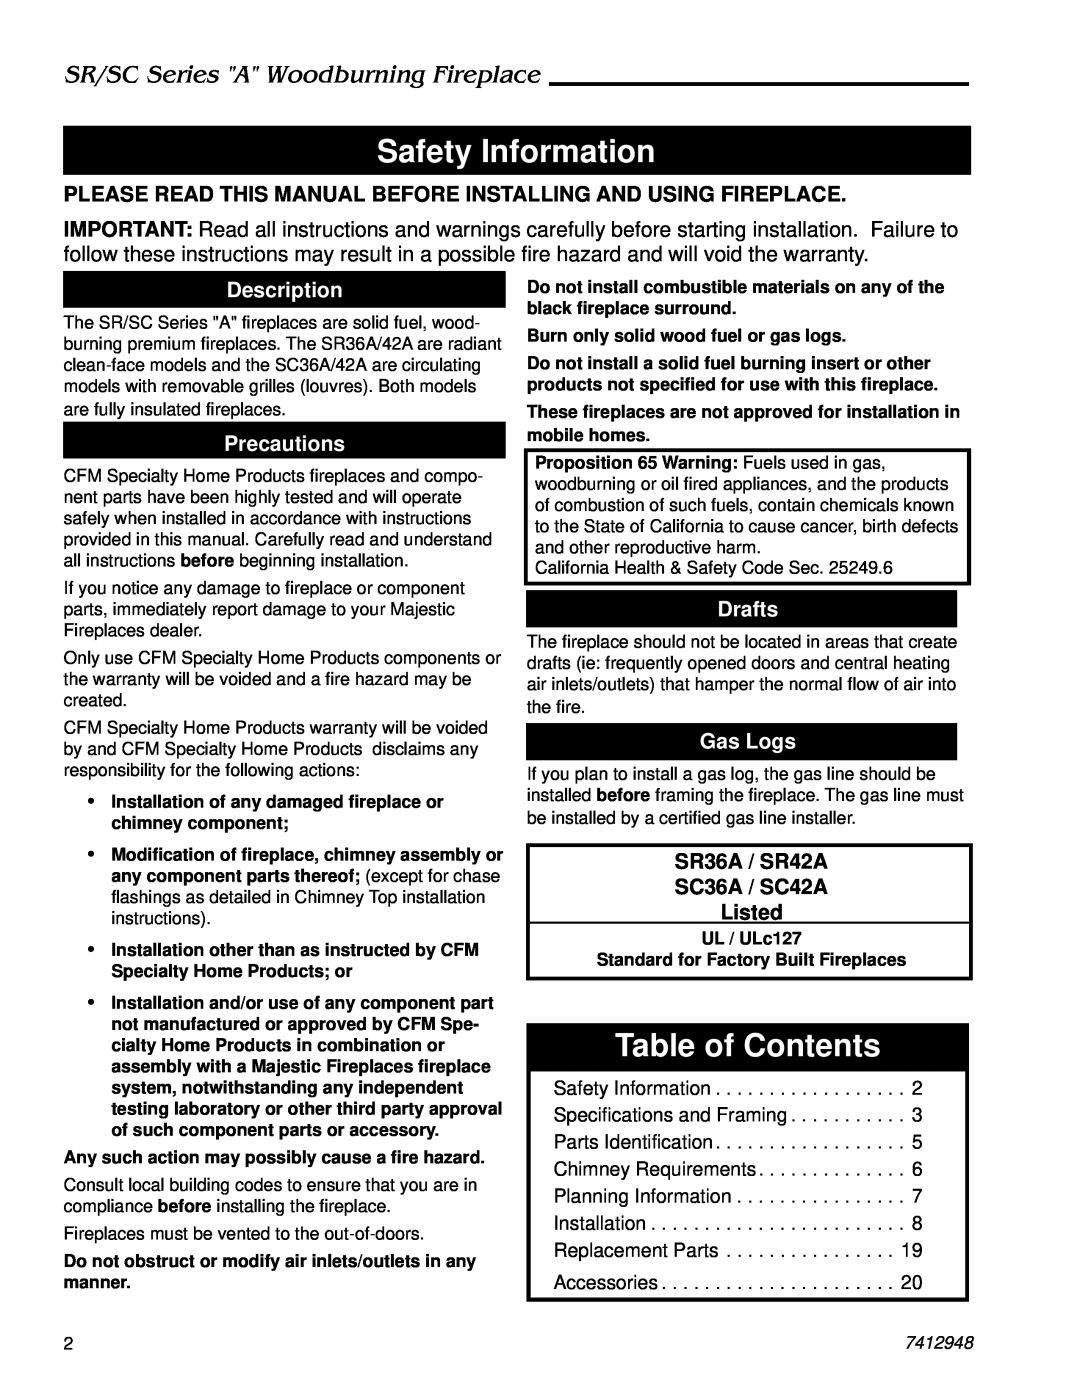 Majestic Appliances SR36A Safety Information, Table of Contents, SR/SC Series A Woodburning Fireplace, Description, Drafts 